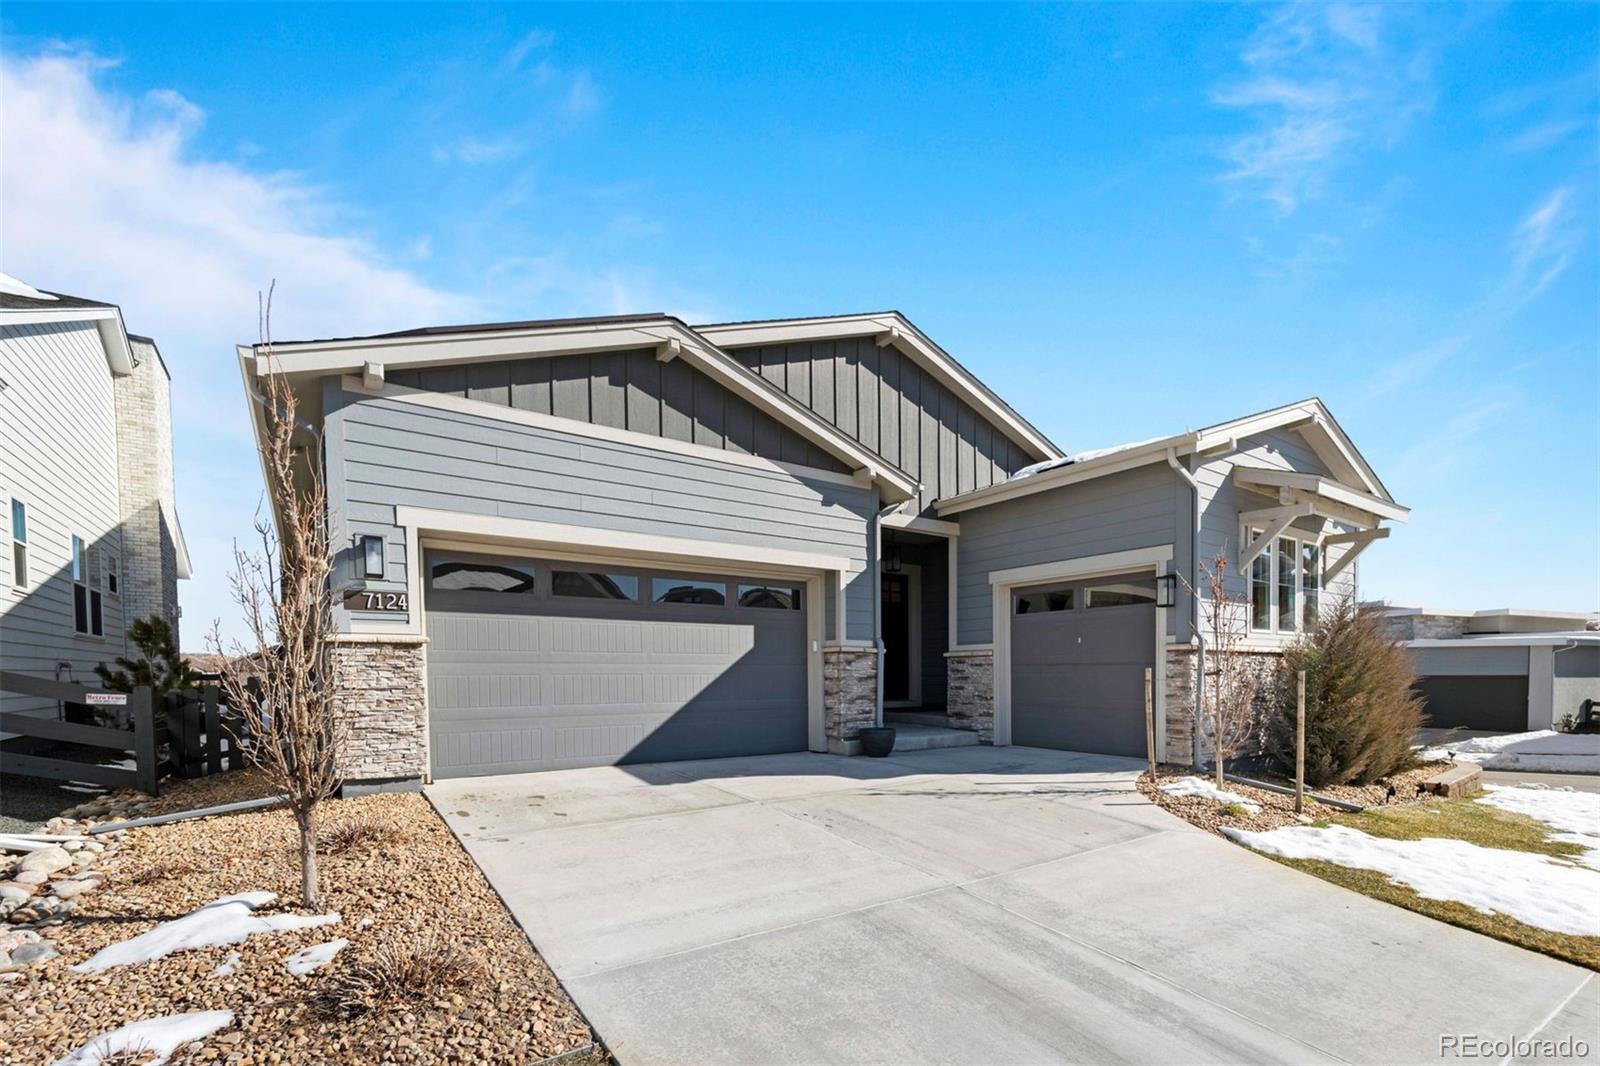 7124  Bellcove Trail, castle pines MLS: 4295313 Beds: 5 Baths: 5 Price: $1,249,990